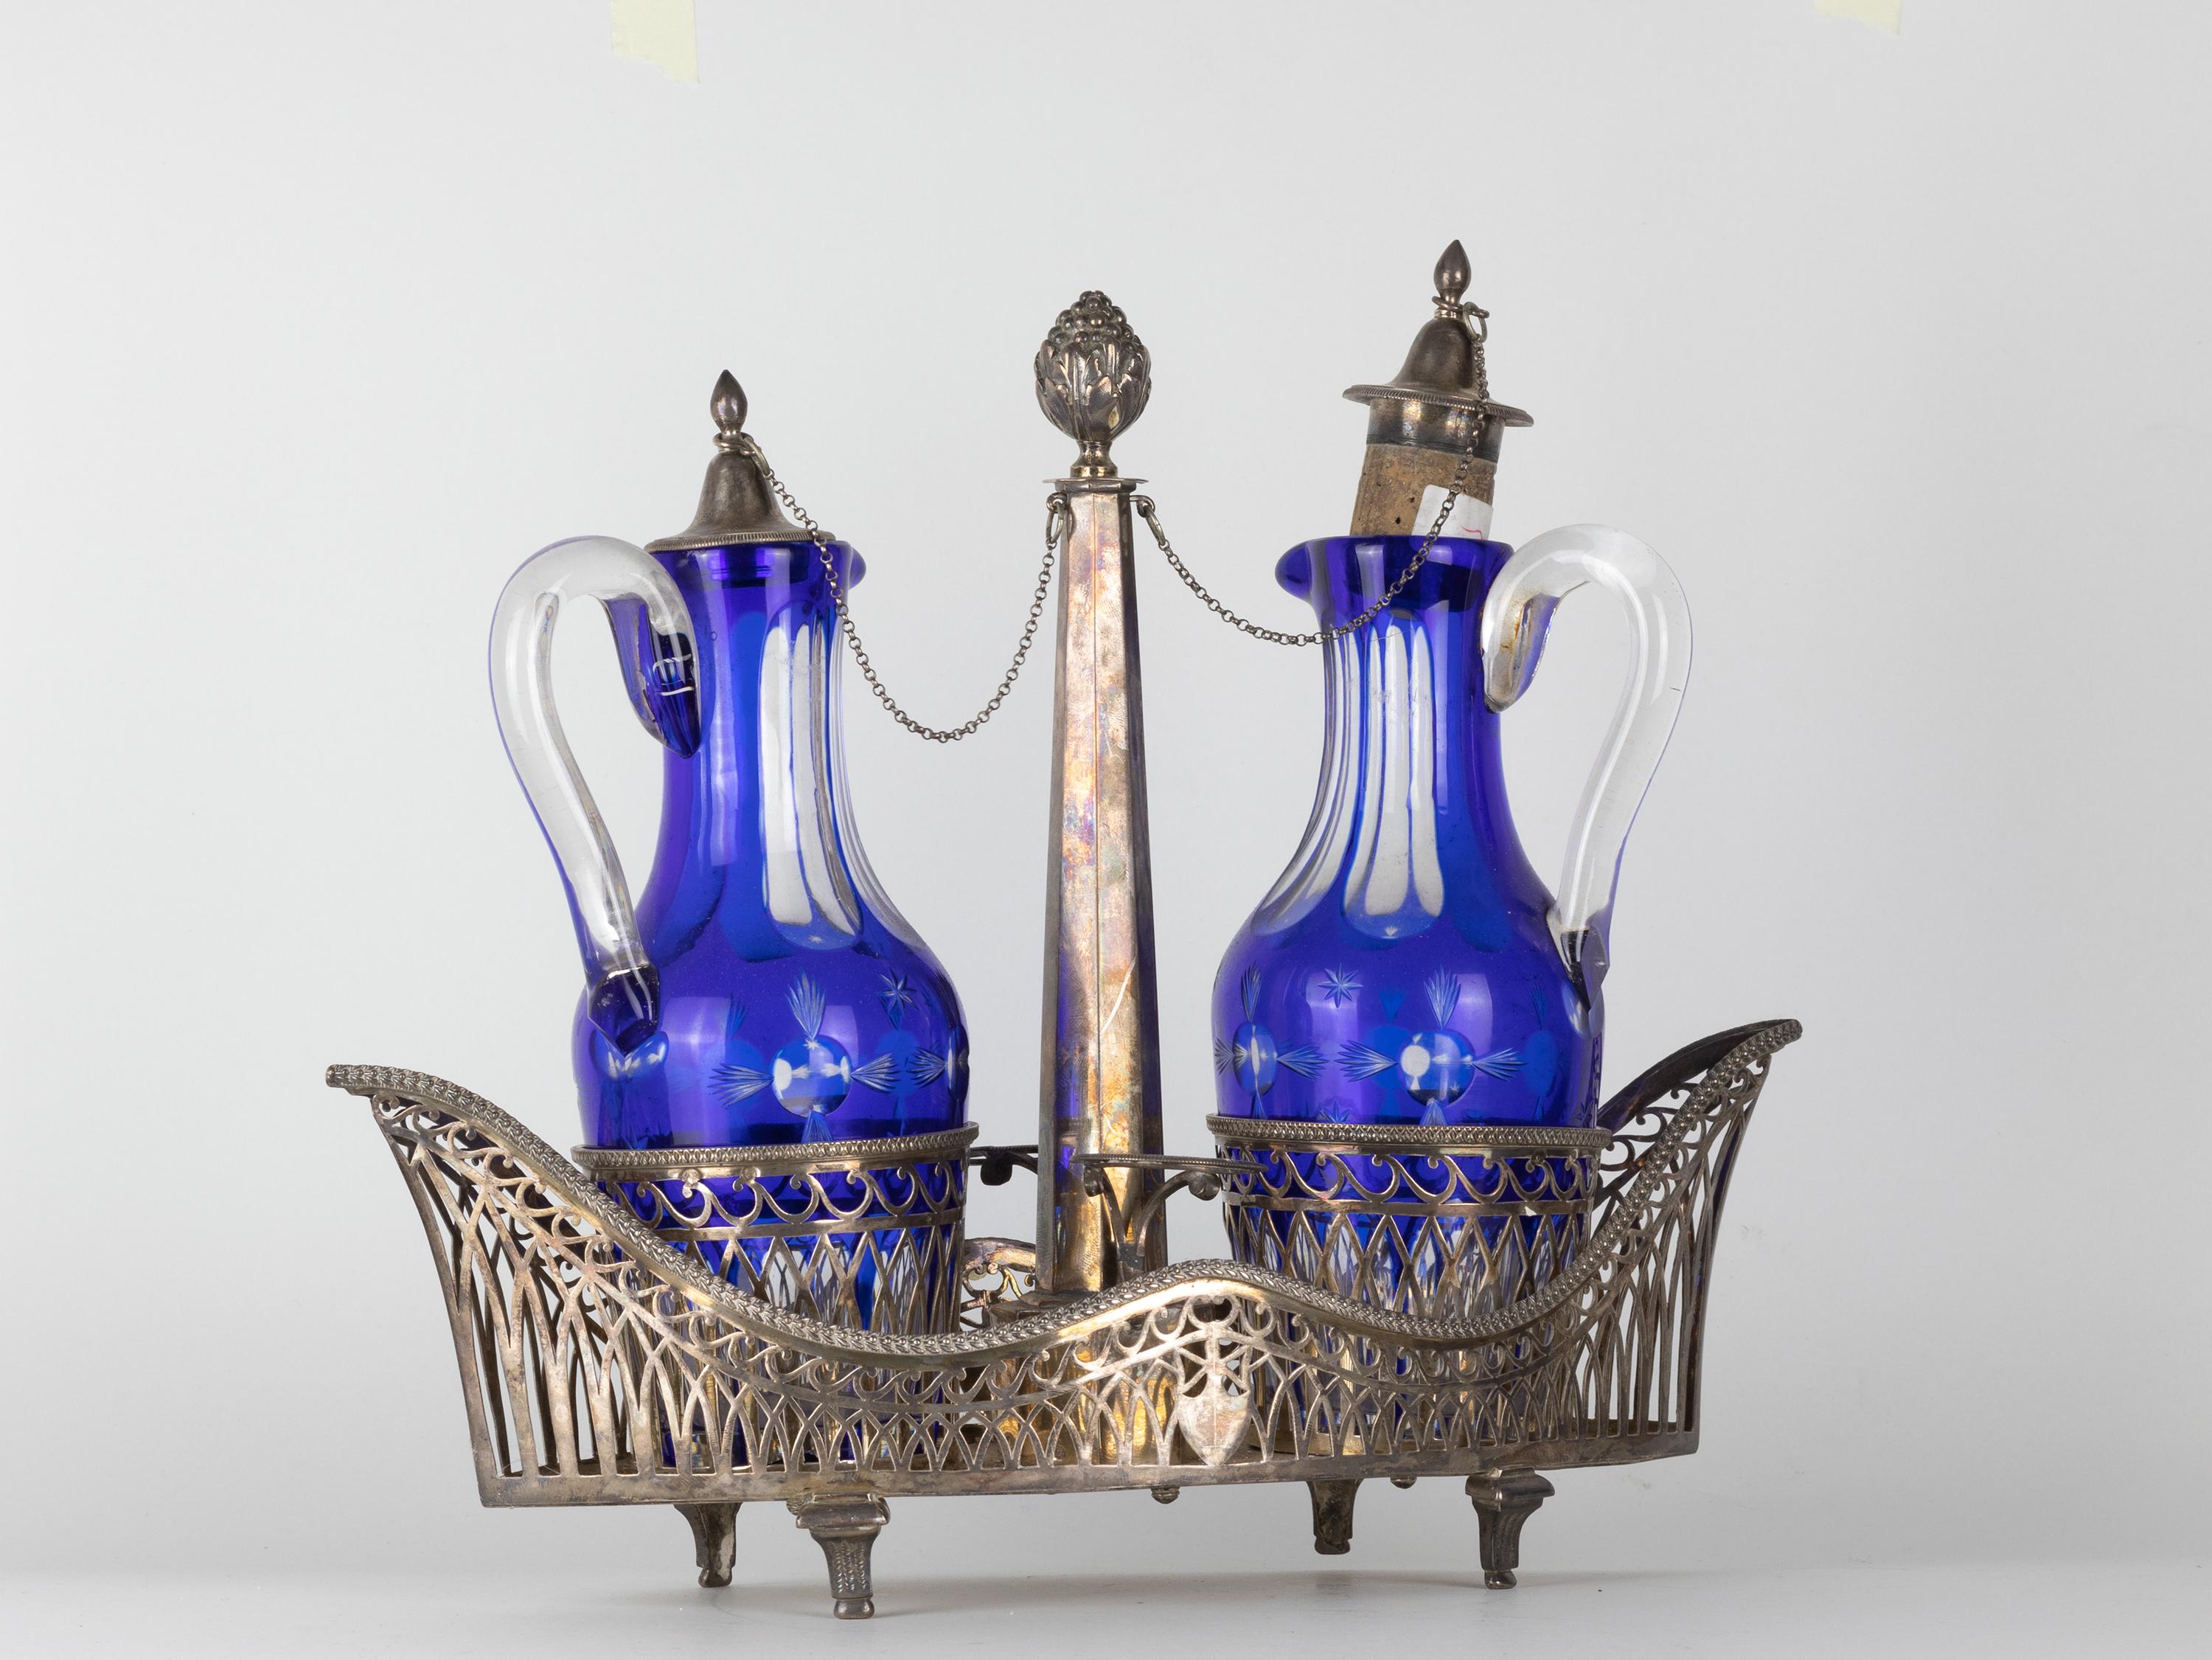 A Silver Cruet table Lombardo Veneto (Venice) set in finely pierced silver, decorated with caryatids form and fret patterns.  Set consisting of oil cruet, salt, pepper, Venice gondola shaped. Engraved silver marks. Grams 1290. 19th Century - circa